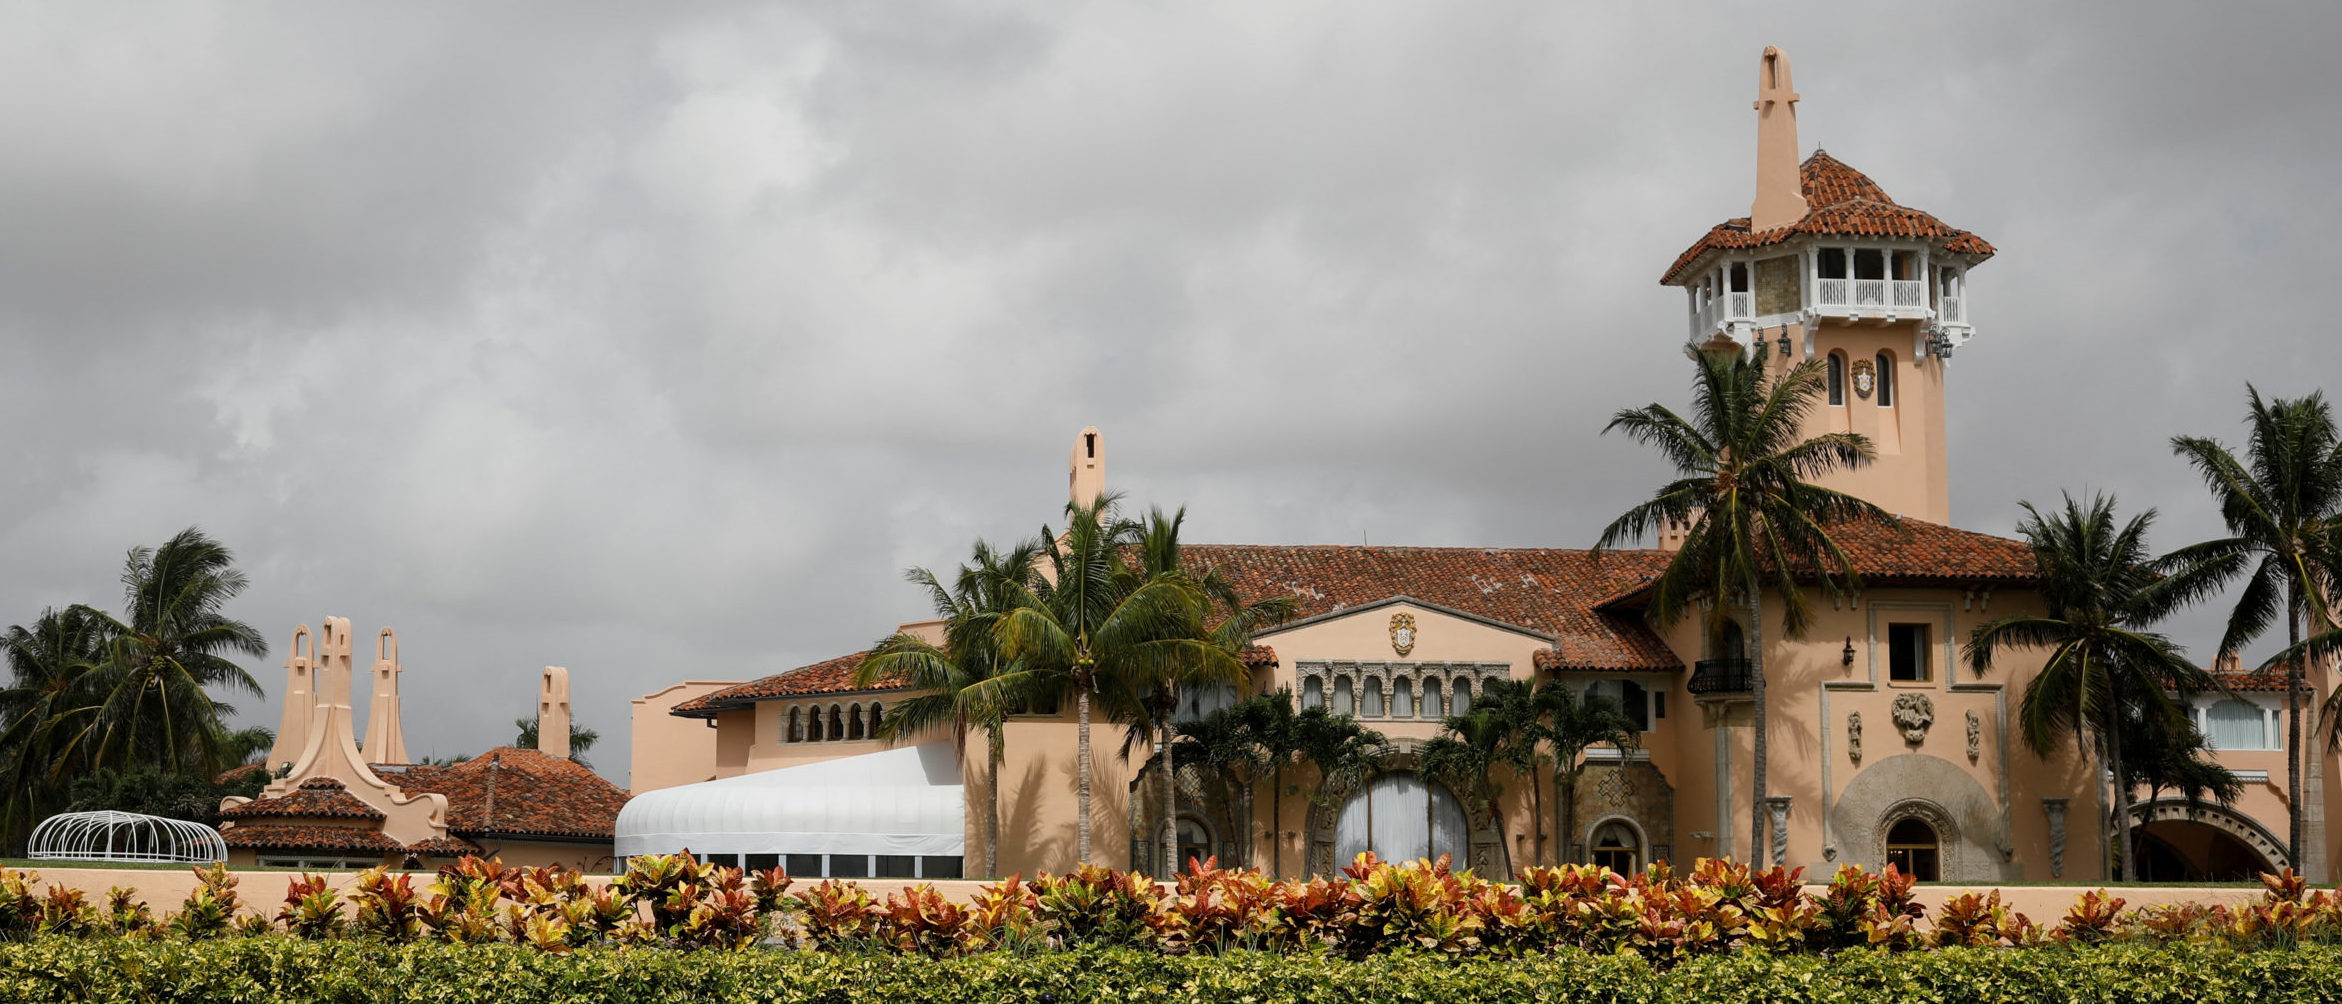 A view of former U.S. President Donald Trump's Mar-a-Lago home after Trump said that FBI agents raided it, in Palm Beach, Florida, U.S. August 9, 2022.